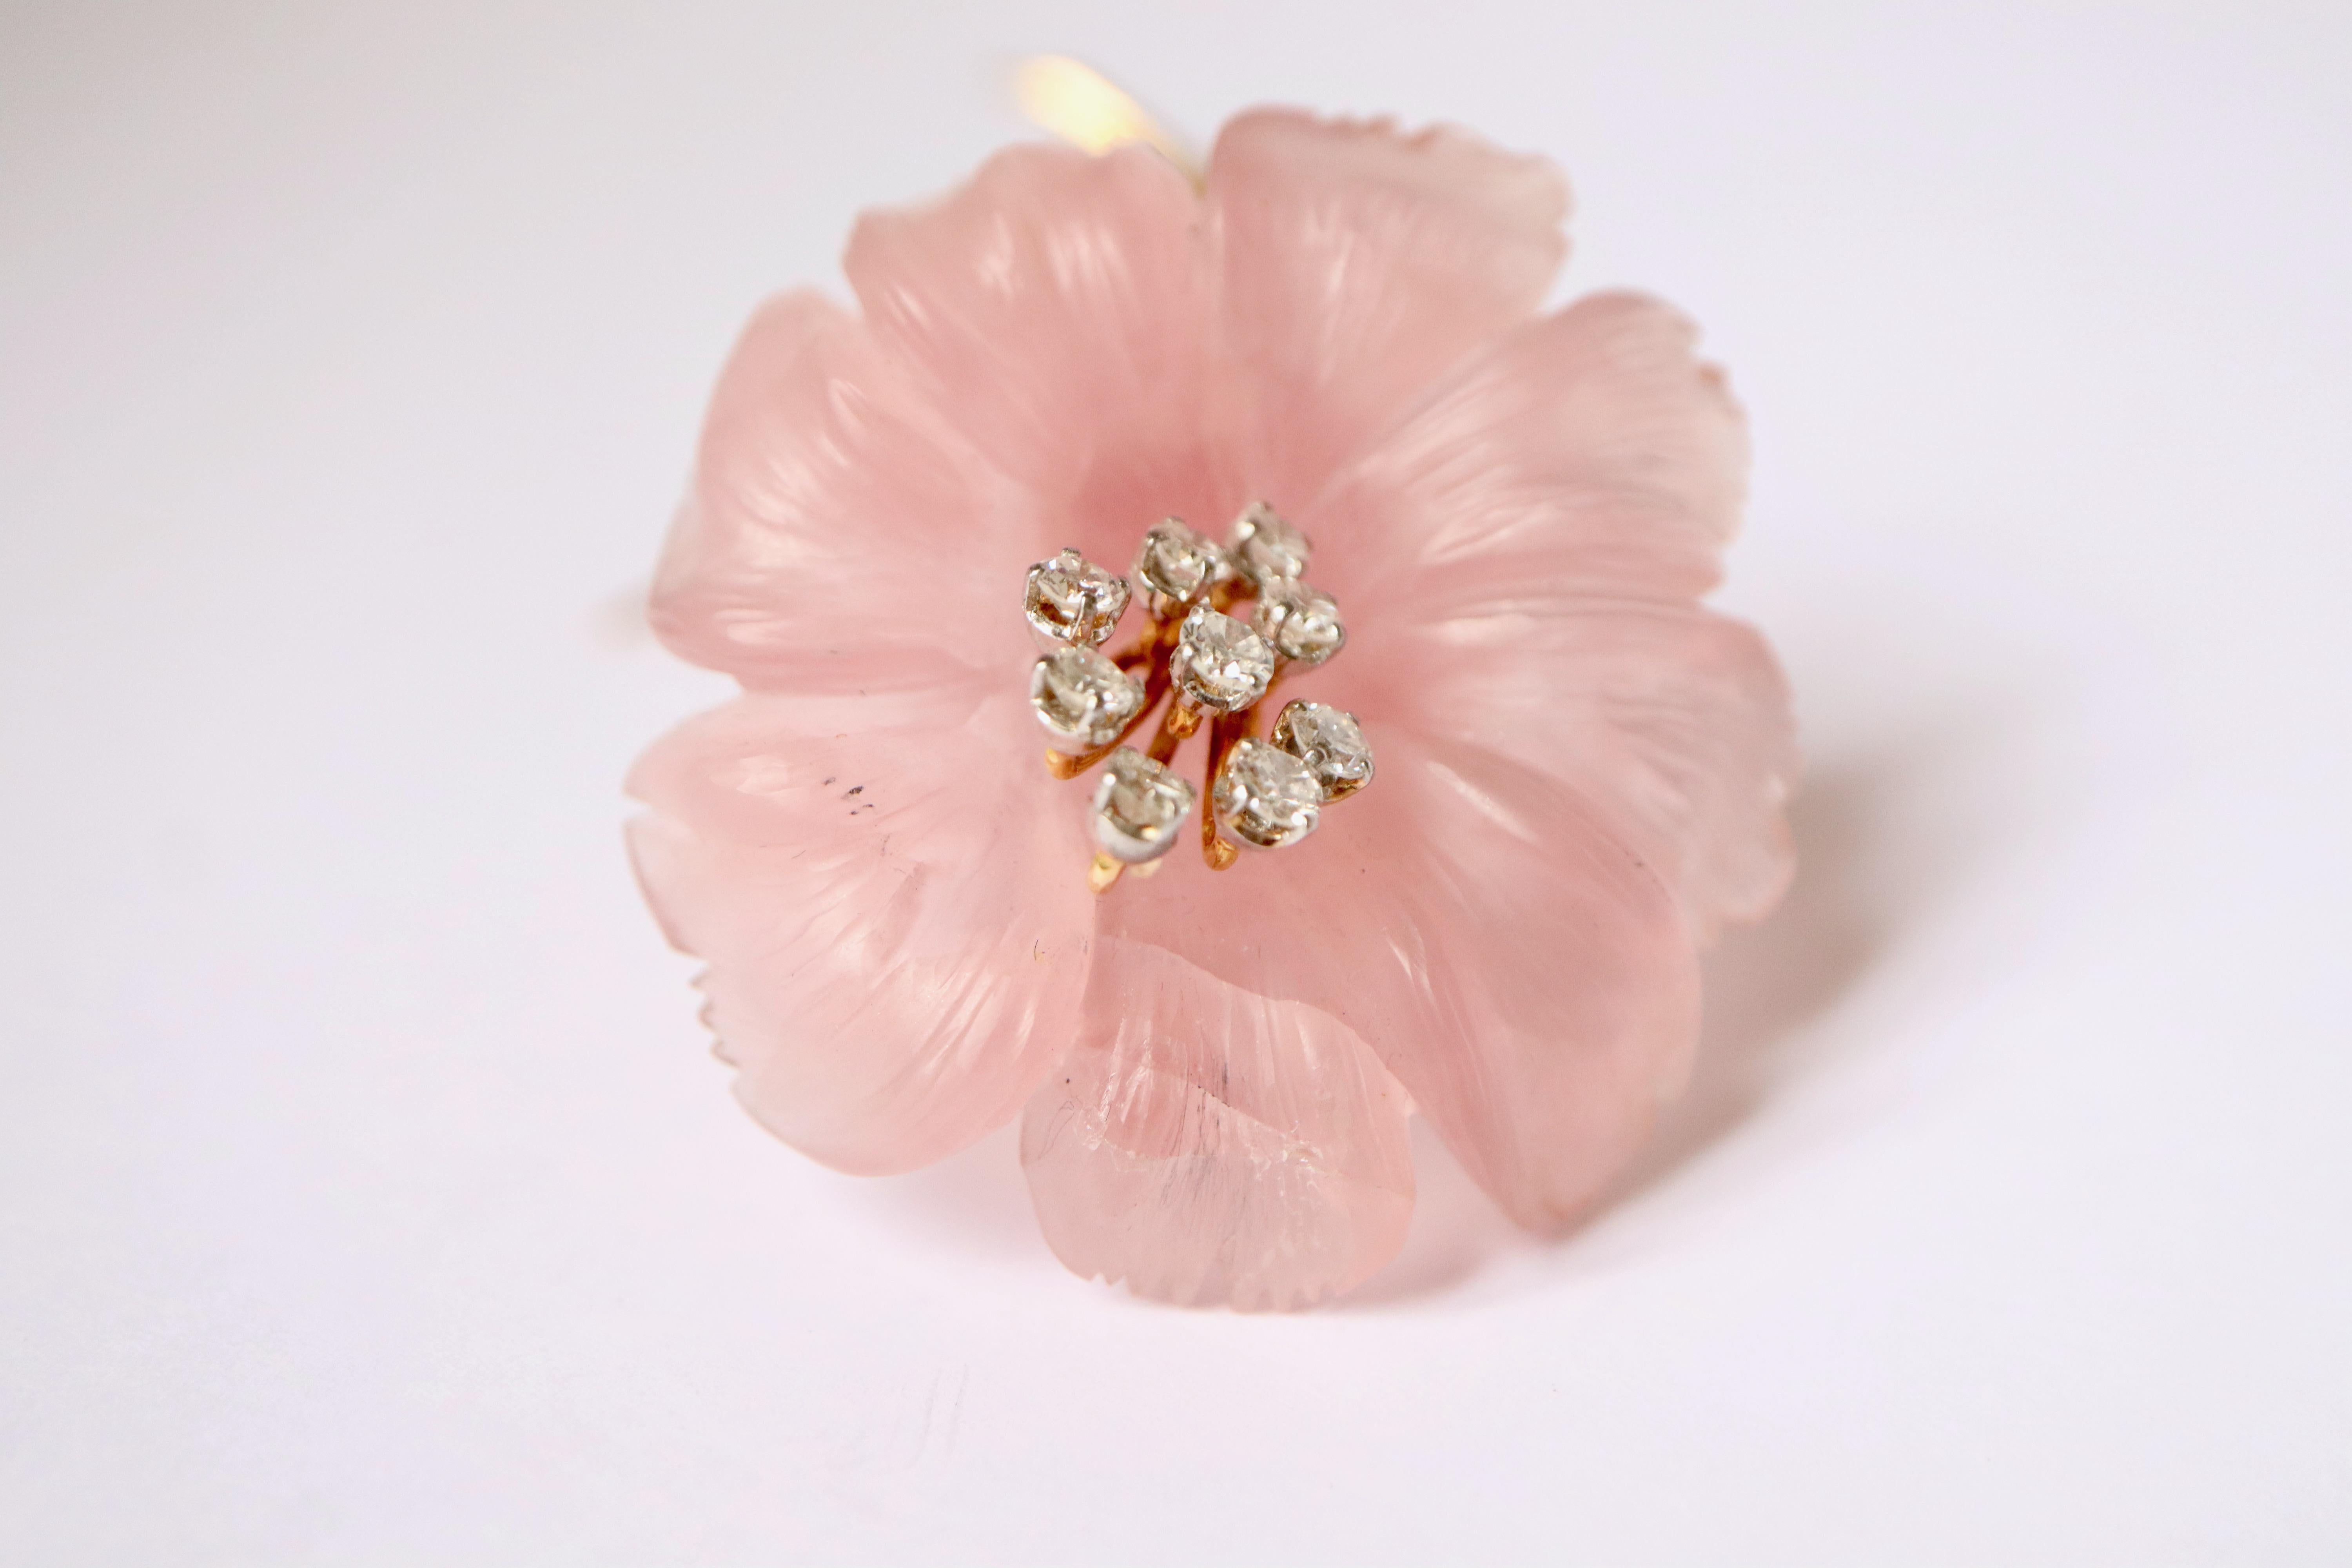 Flower brooch in rose quartz, diamonds and 18 kt yellow gold.
This flower brooch is made up of a rose quartz flower, with its pistil in 18 kt yellow gold set with 9 diamonds for approximately 1.5 carats, and the stem in 18 kt yellow gold.
Signed